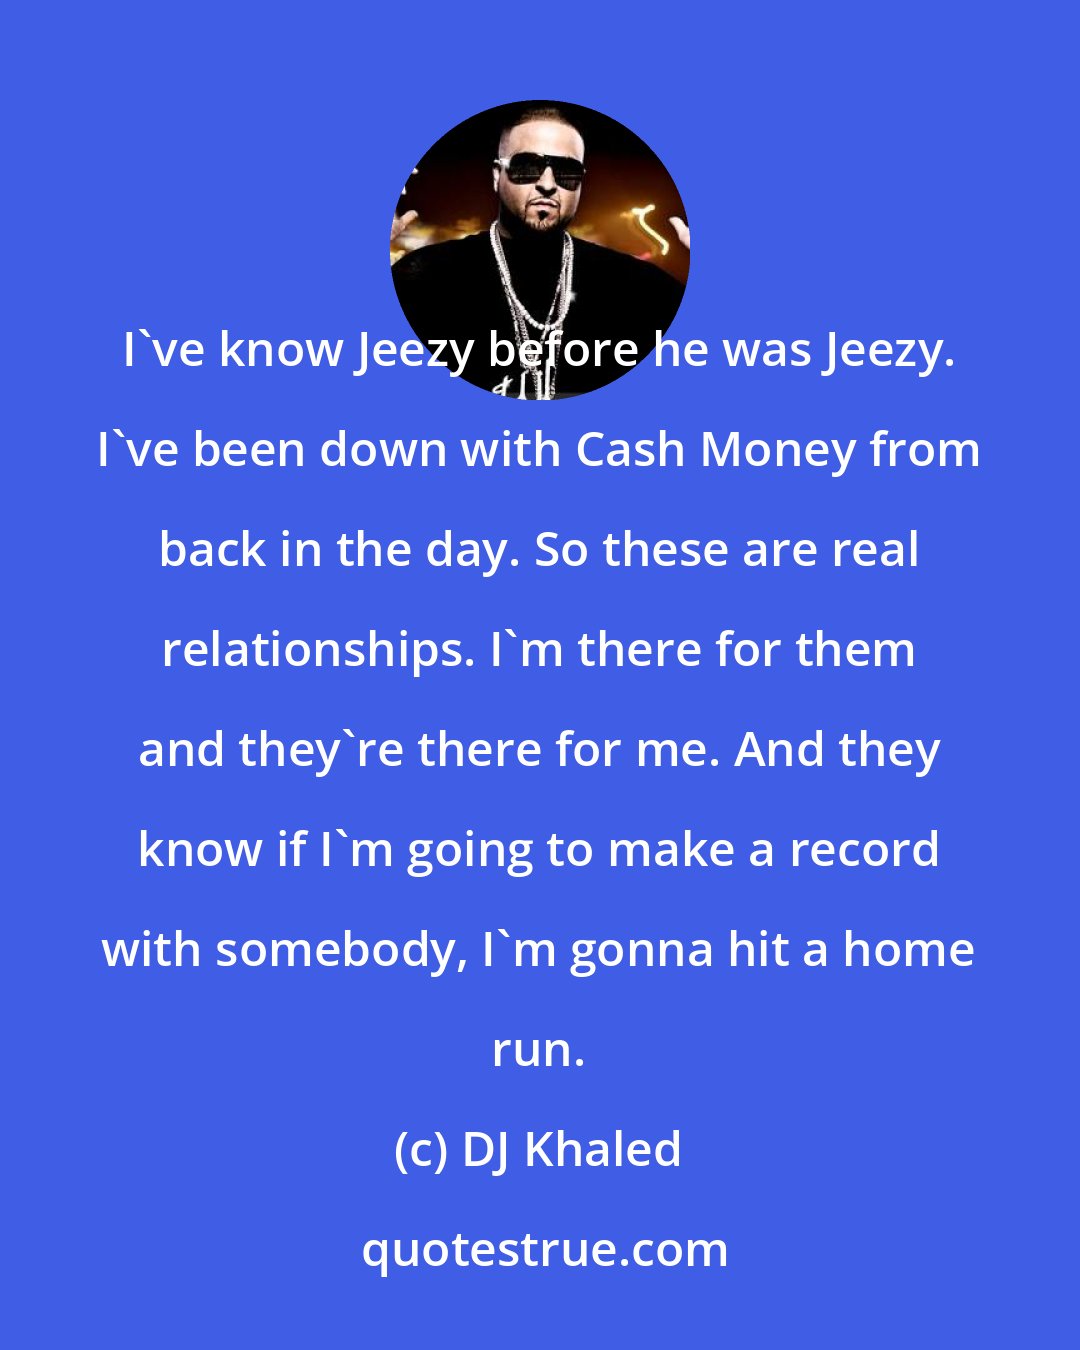 DJ Khaled: I've know Jeezy before he was Jeezy. I've been down with Cash Money from back in the day. So these are real relationships. I'm there for them and they're there for me. And they know if I'm going to make a record with somebody, I'm gonna hit a home run.